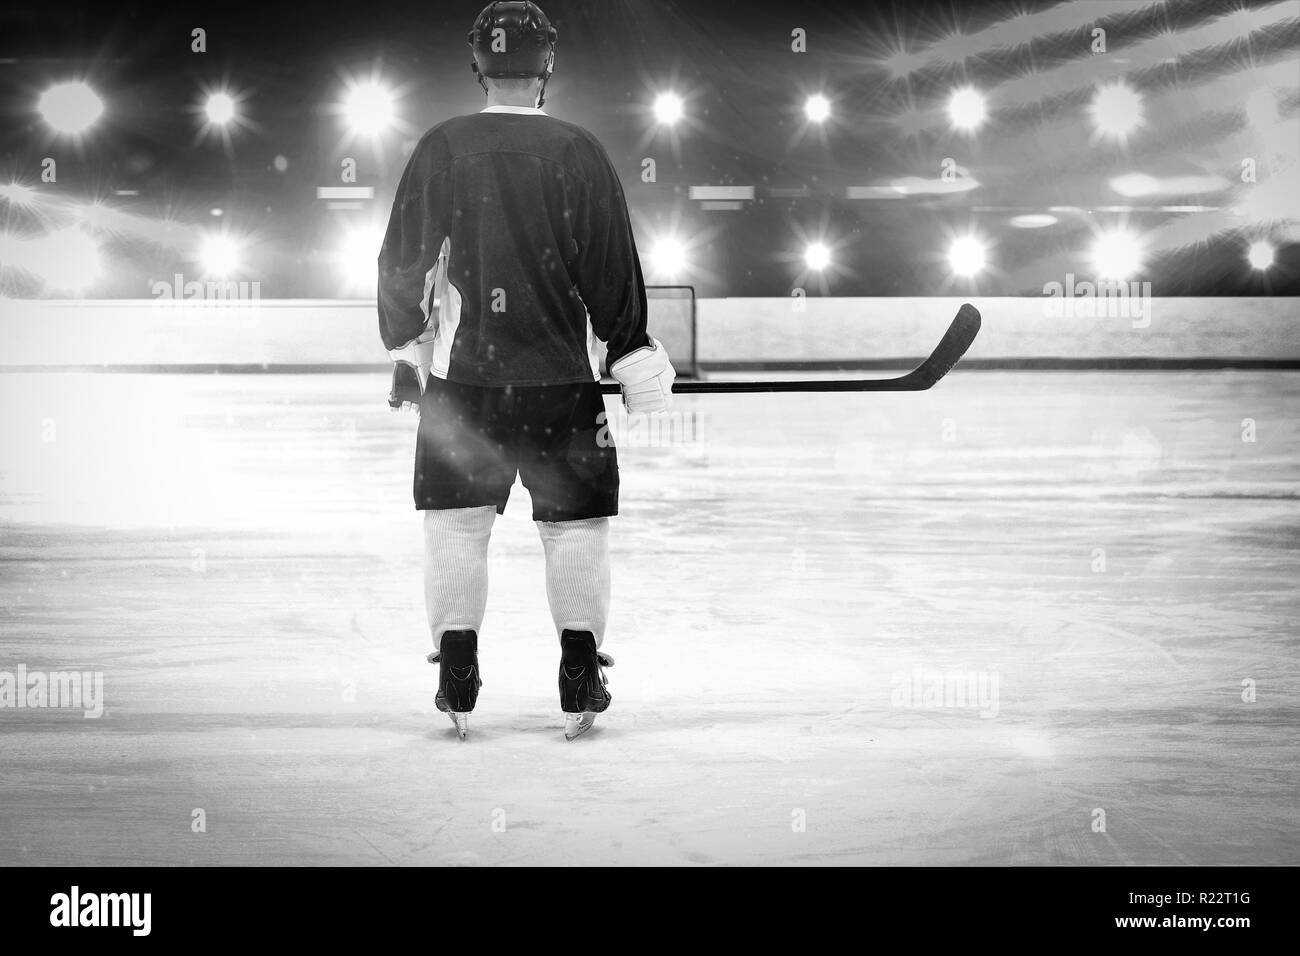 Composite image of ice hockey player on the ice Stock Photo